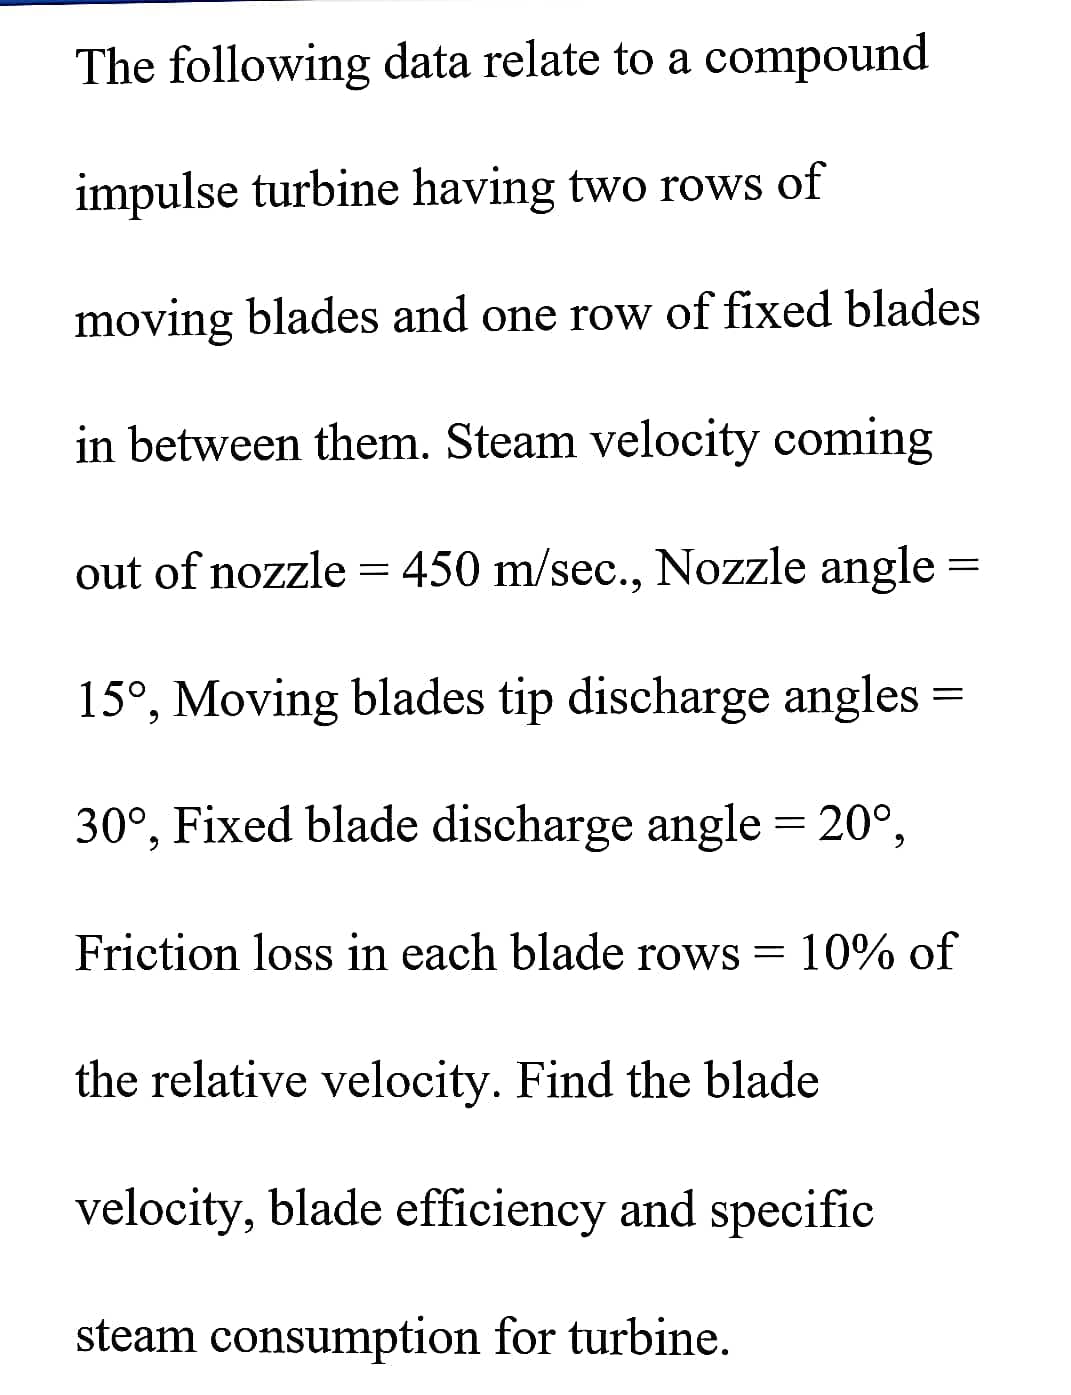 The following data relate to a compound
impulse turbine having two rows of
moving blades and one row of fixed blades
in between them. Steam velocity coming
out of nozzle = 450 m/sec., Nozzle angle
15°, Moving blades tip discharge angles =
30°, Fixed blade discharge angle = 20°,
Friction loss in each blade rows = 10% of
the relative velocity. Find the blade
velocity, blade efficiency and specific
steam consumption for turbine.
